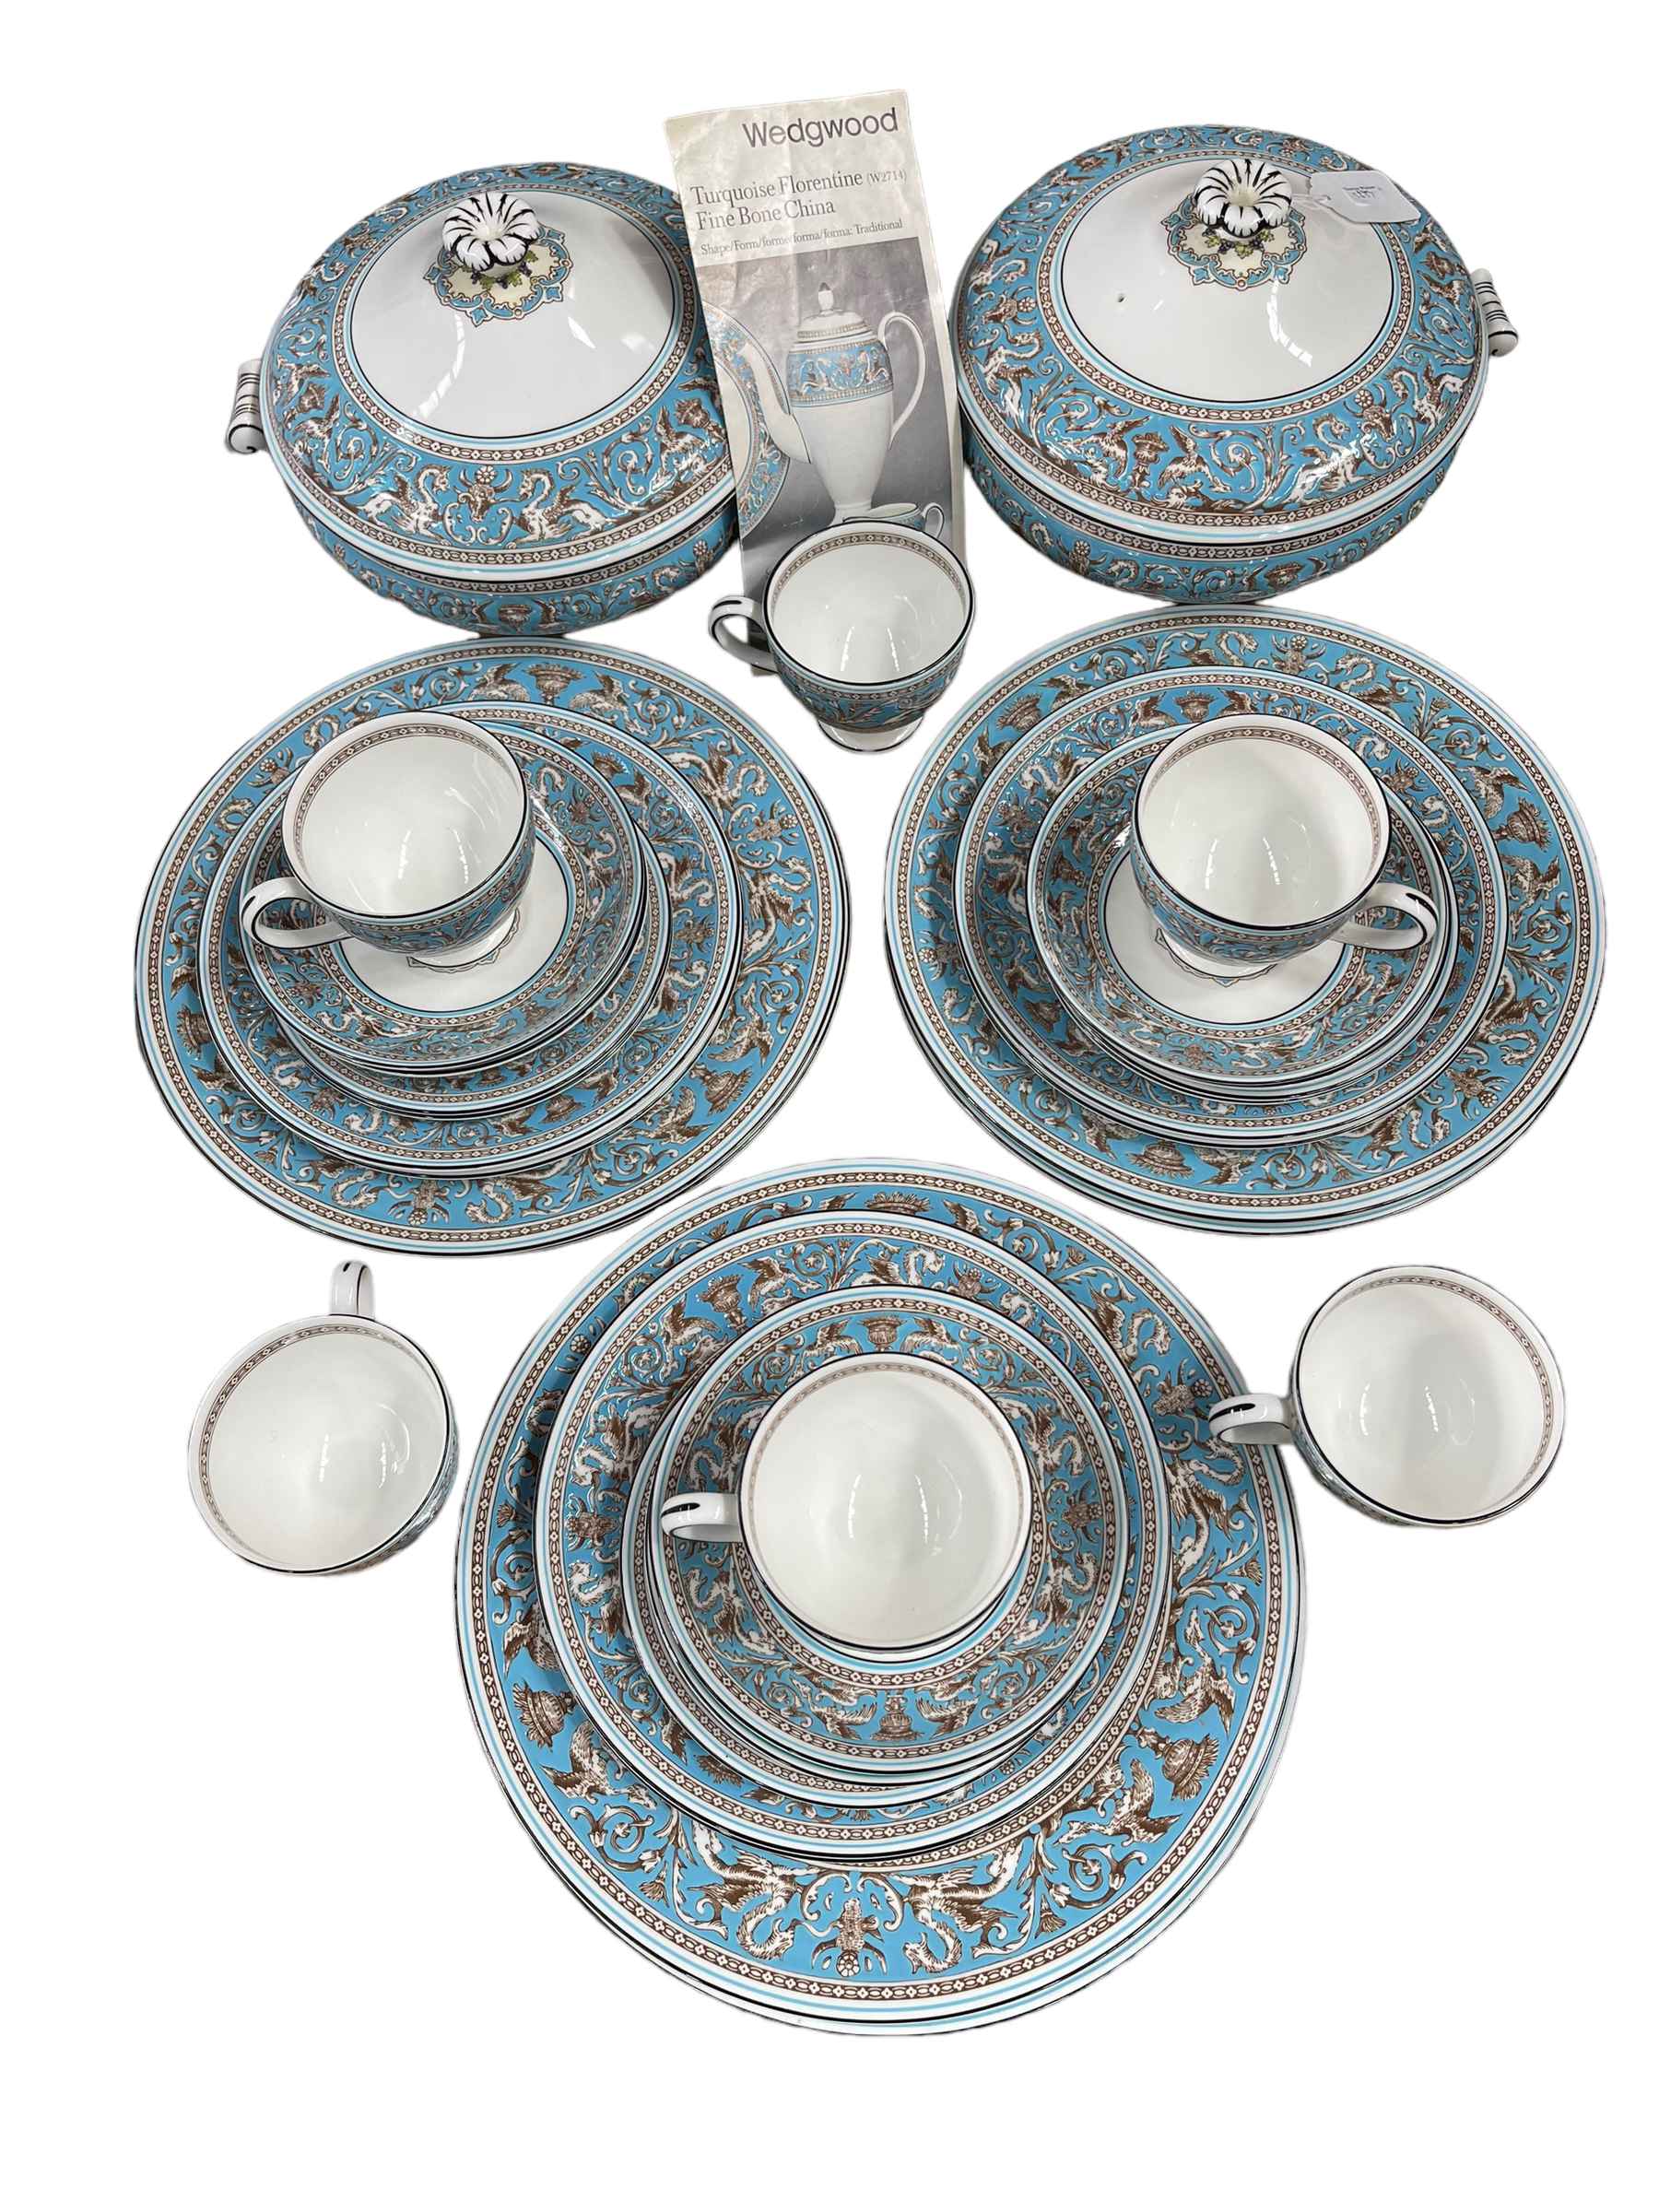 Wedgwood Florentine 32 piece dinner and tea service including tureen and six place setting.